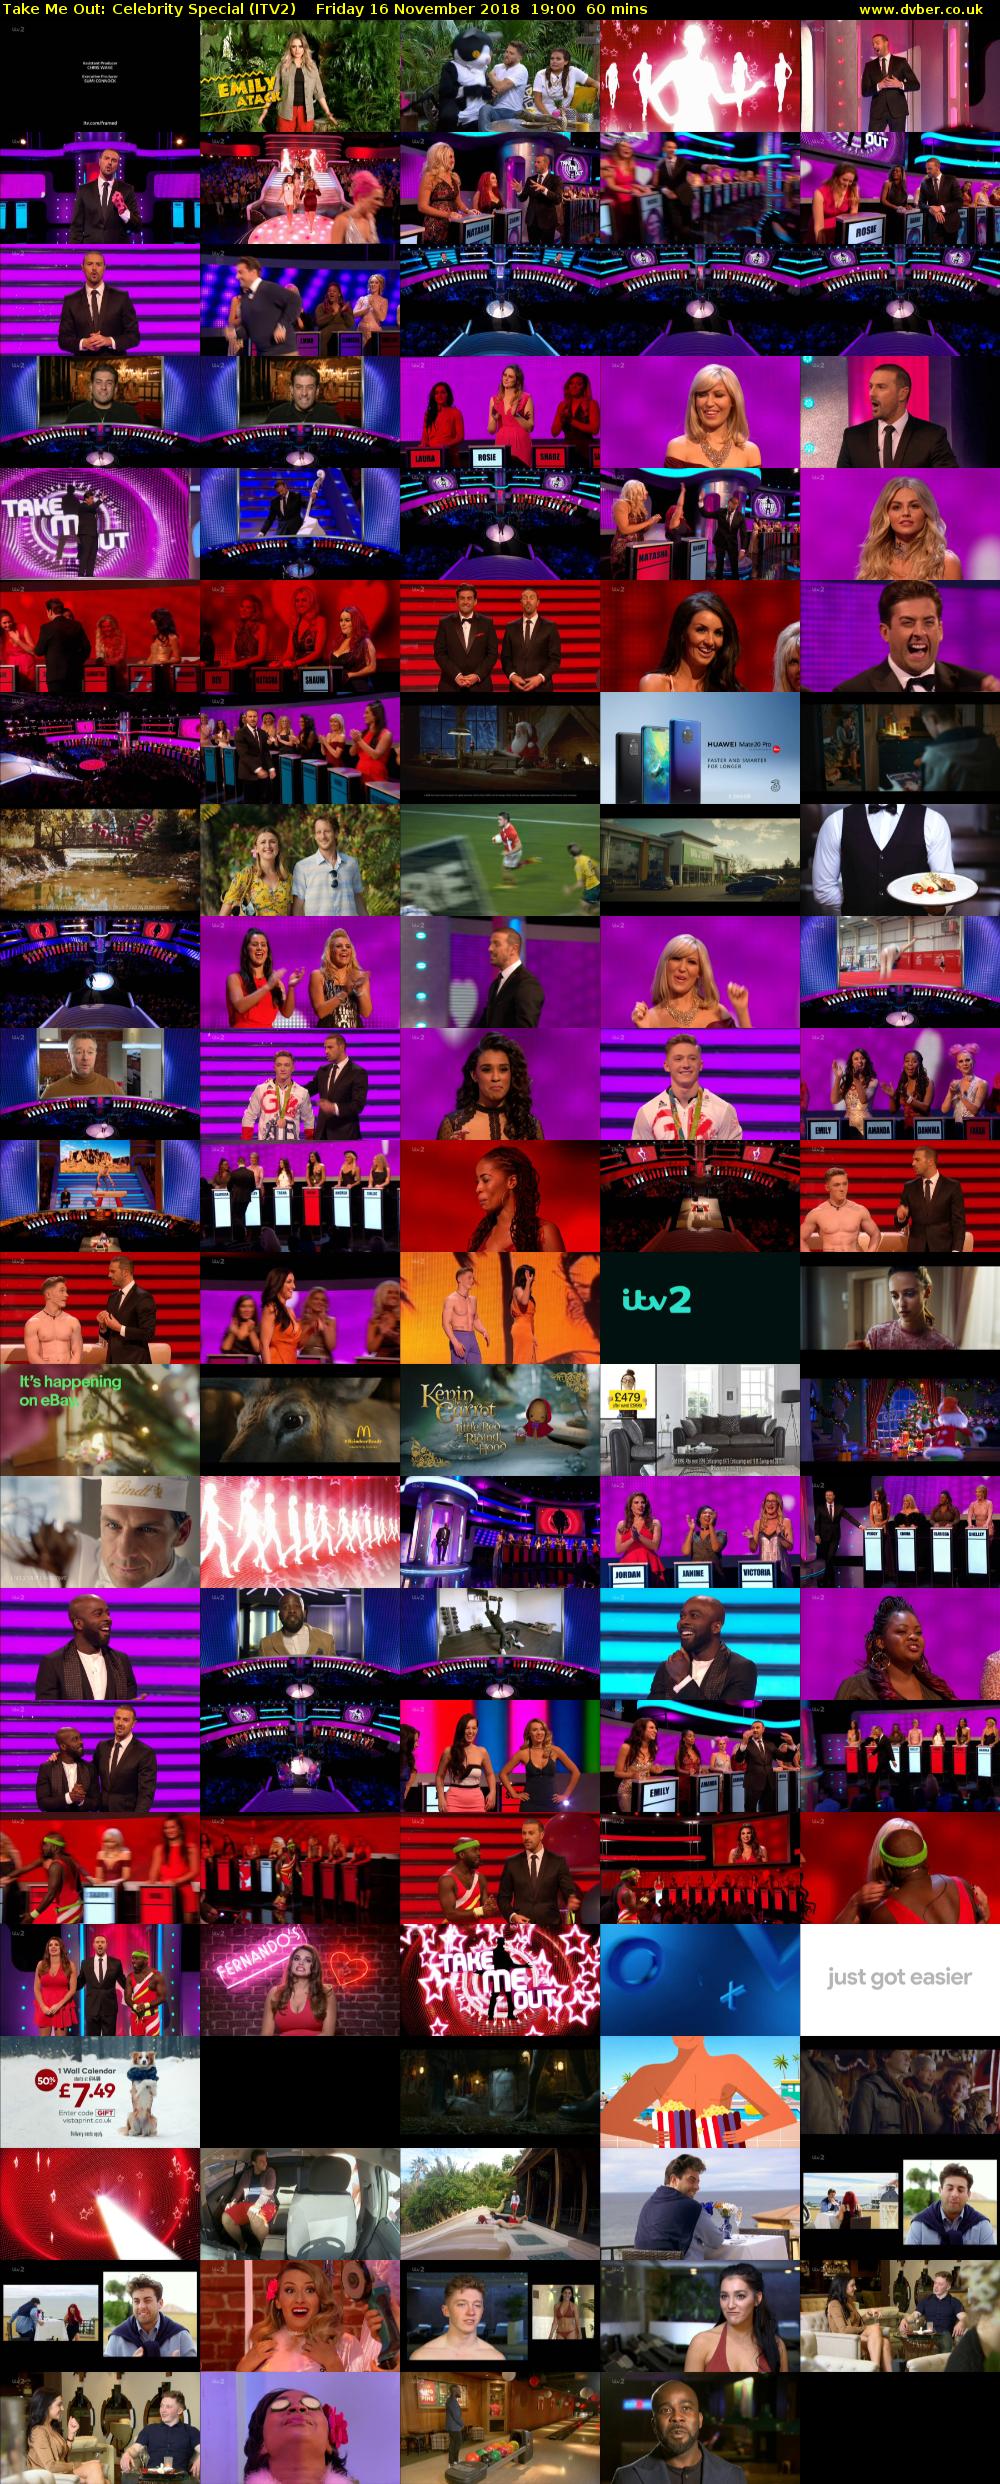 Take Me Out: Celebrity Special (ITV2) Friday 16 November 2018 19:00 - 20:00